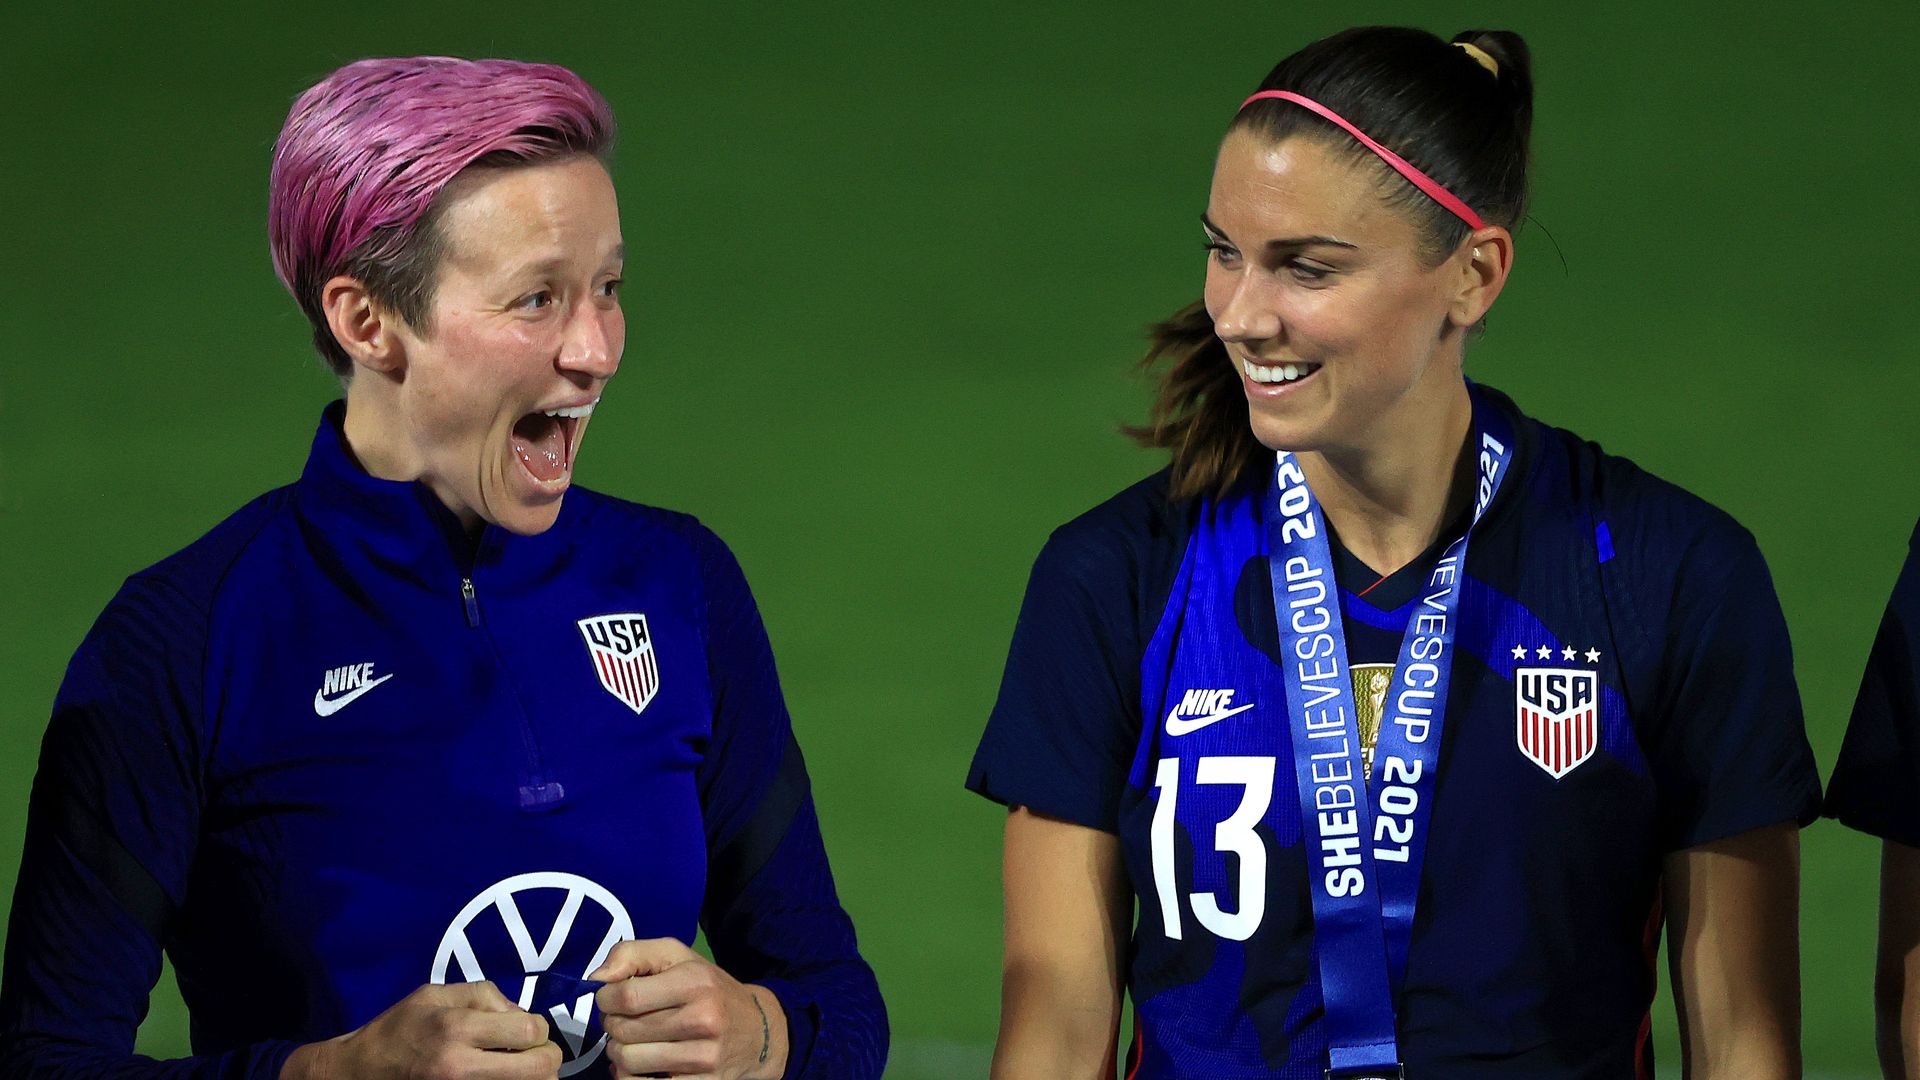 Megan Rapinoe #15 and Alex Morgan #13 of the United States celebrate winning the SheBelieves Cup at Exploria Stadium on February 24, 2021 in Orlando, Florida.